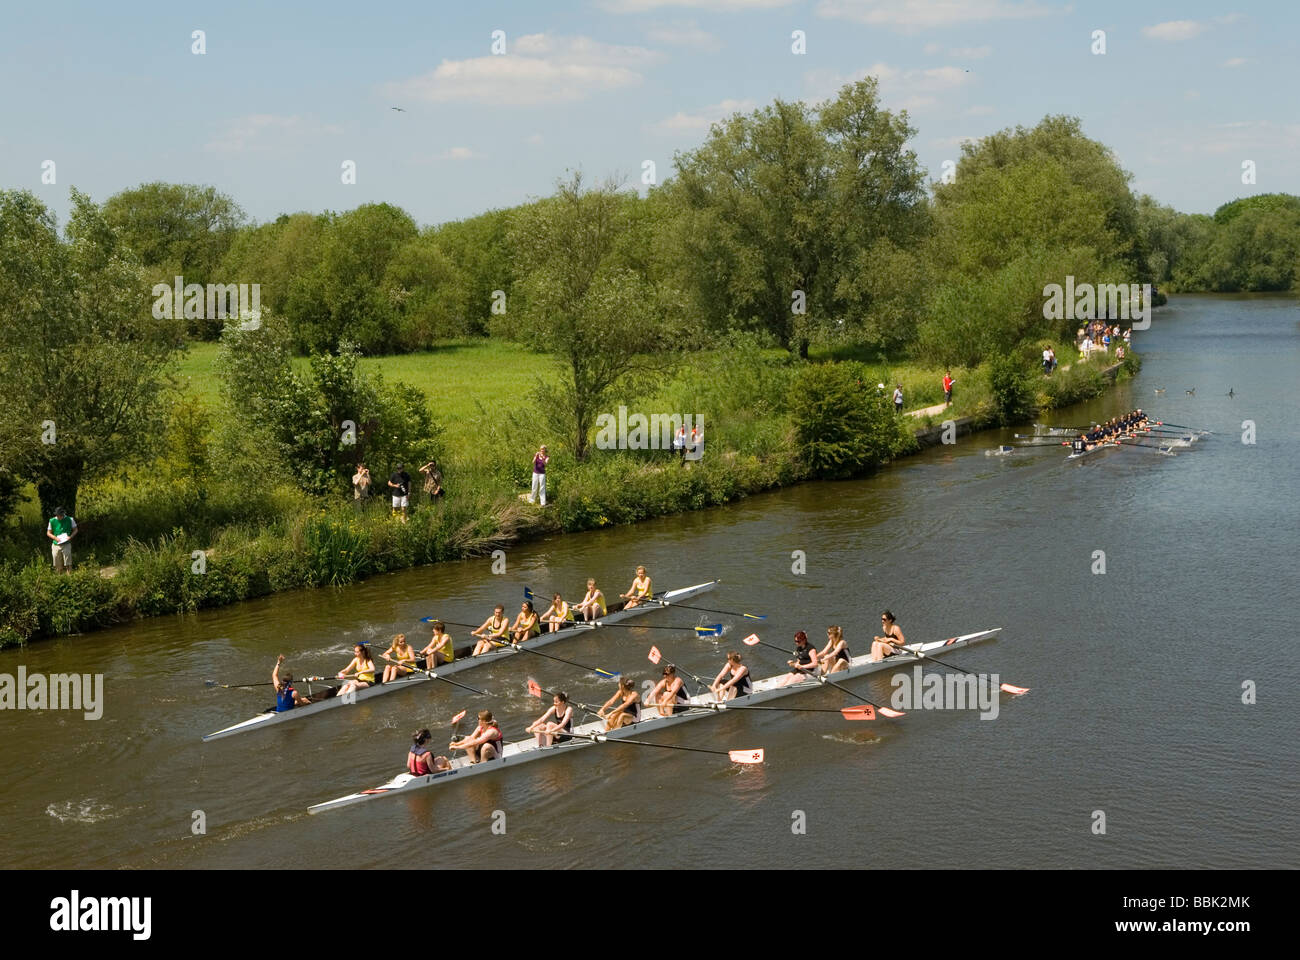 Oxford University Rowing Clubs Eights week Rowing course the River ISIS en fait River Thames à Oxford Oxfordshire 2009 2000s HOMER SYKES Banque D'Images